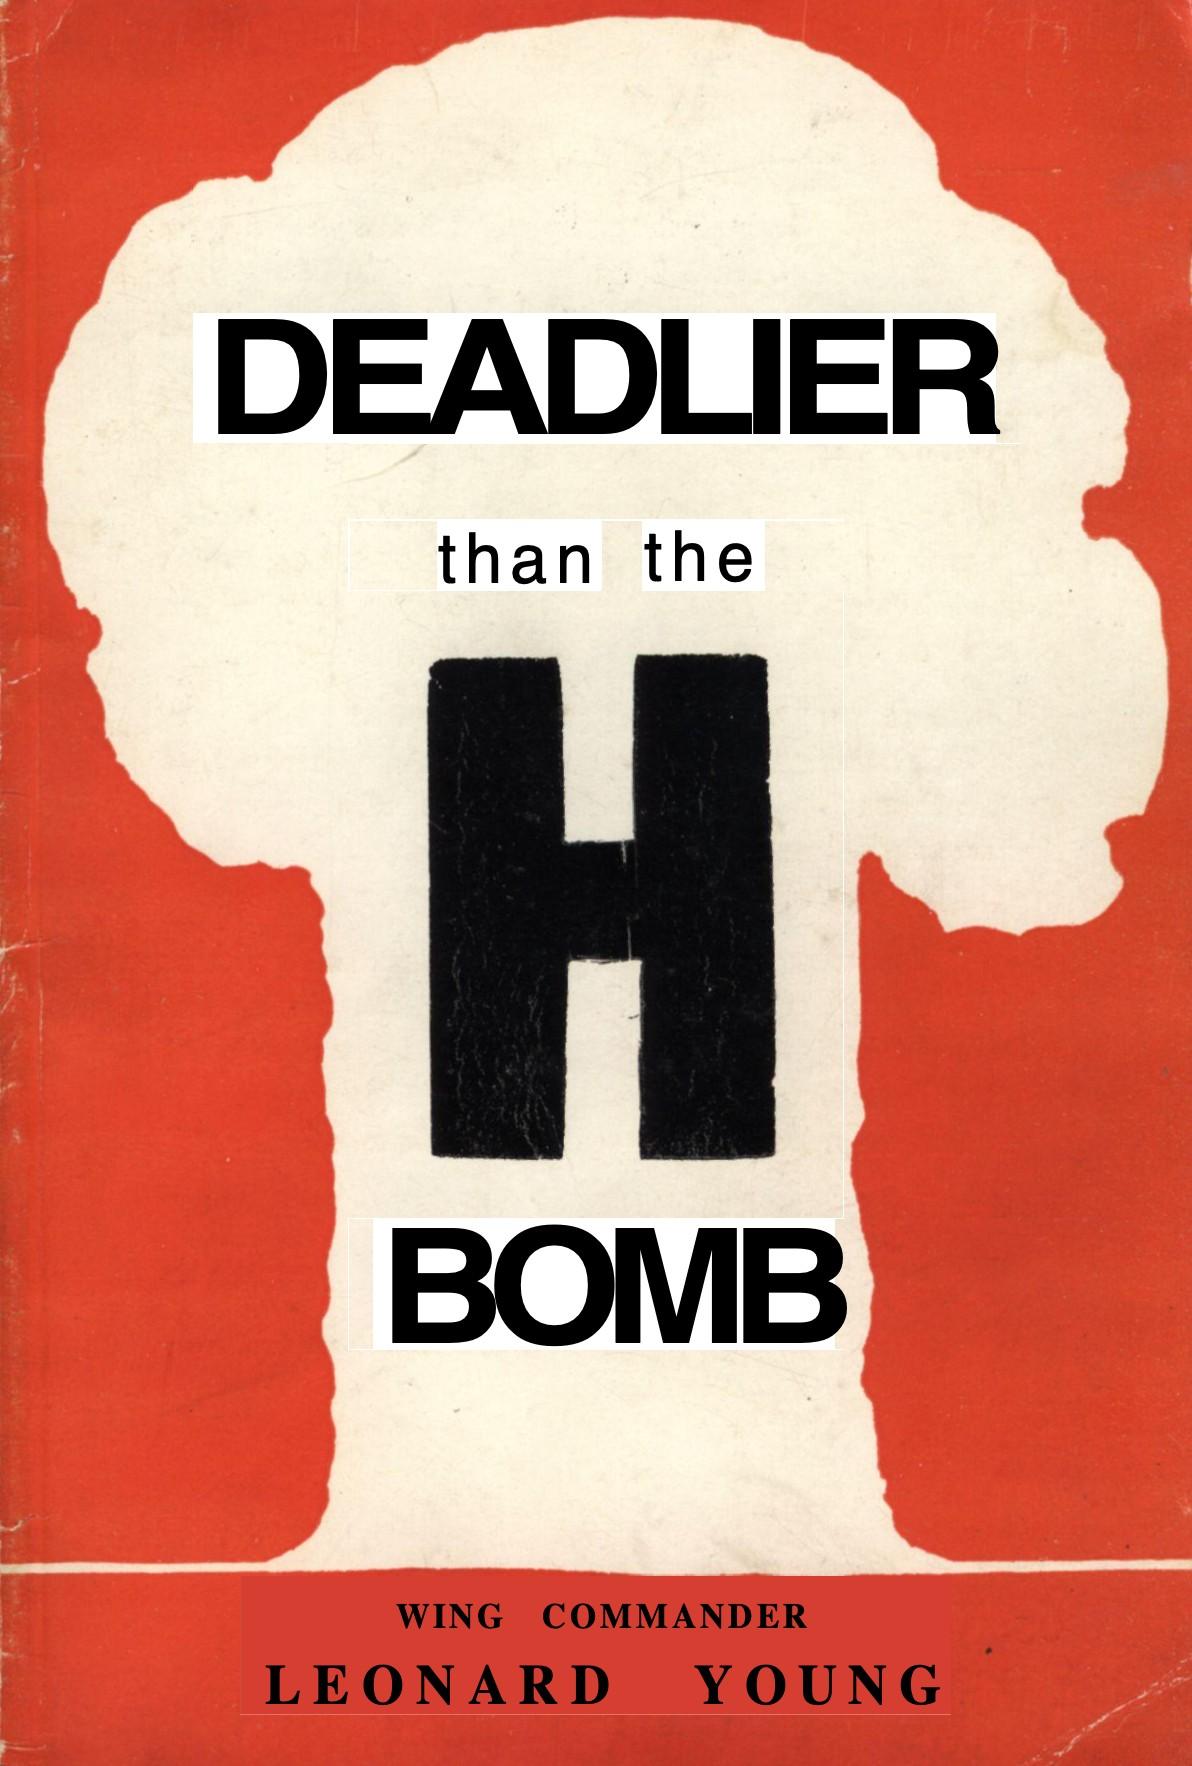 Deadlier Than the H-Bomb (1956) by Leonard Young